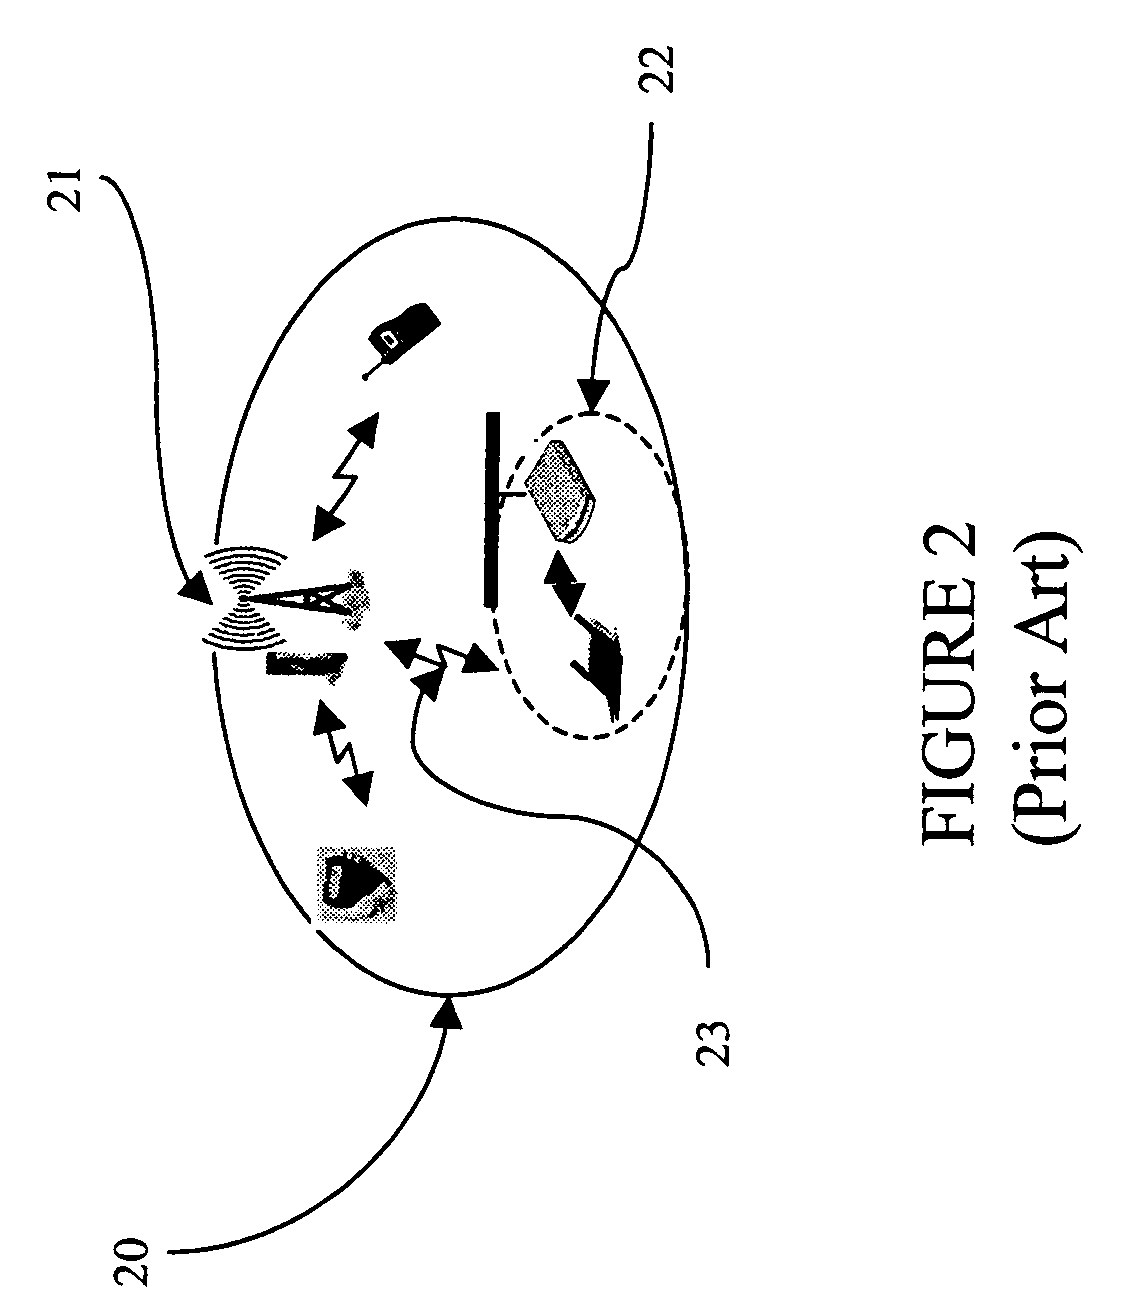 Multi-hop intelligent relaying method and apparatus for use in a frequency division duplexing based wireless access network